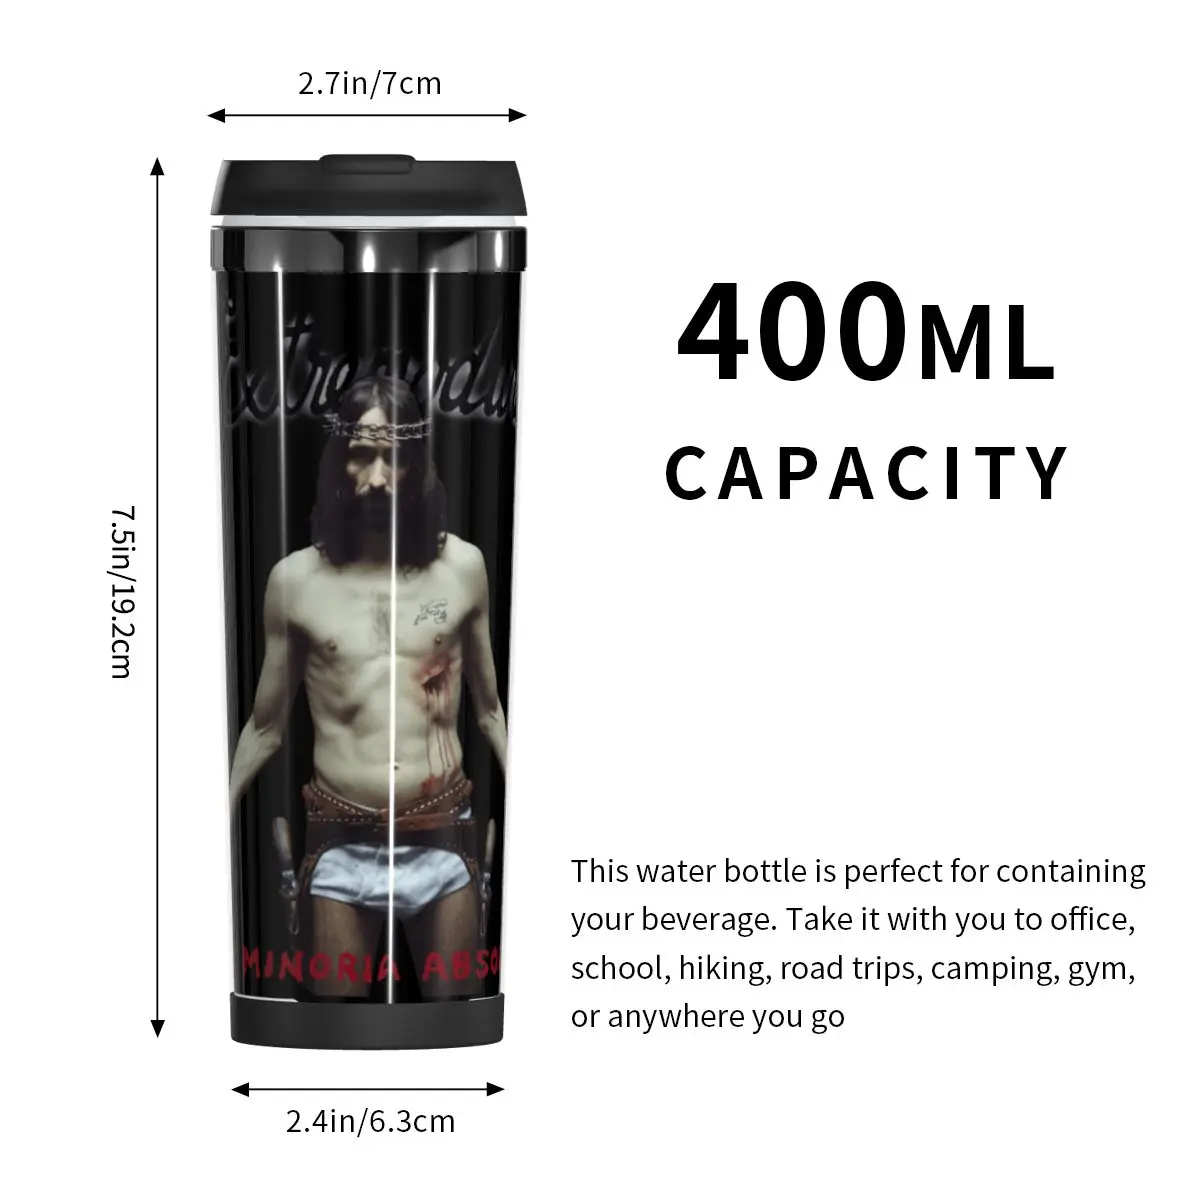 

Double Insulated Water Cup EXTREMODURO Graphic Vintage Heat Insulation multi-function cups Thermos bottle Mug Humor Graphic